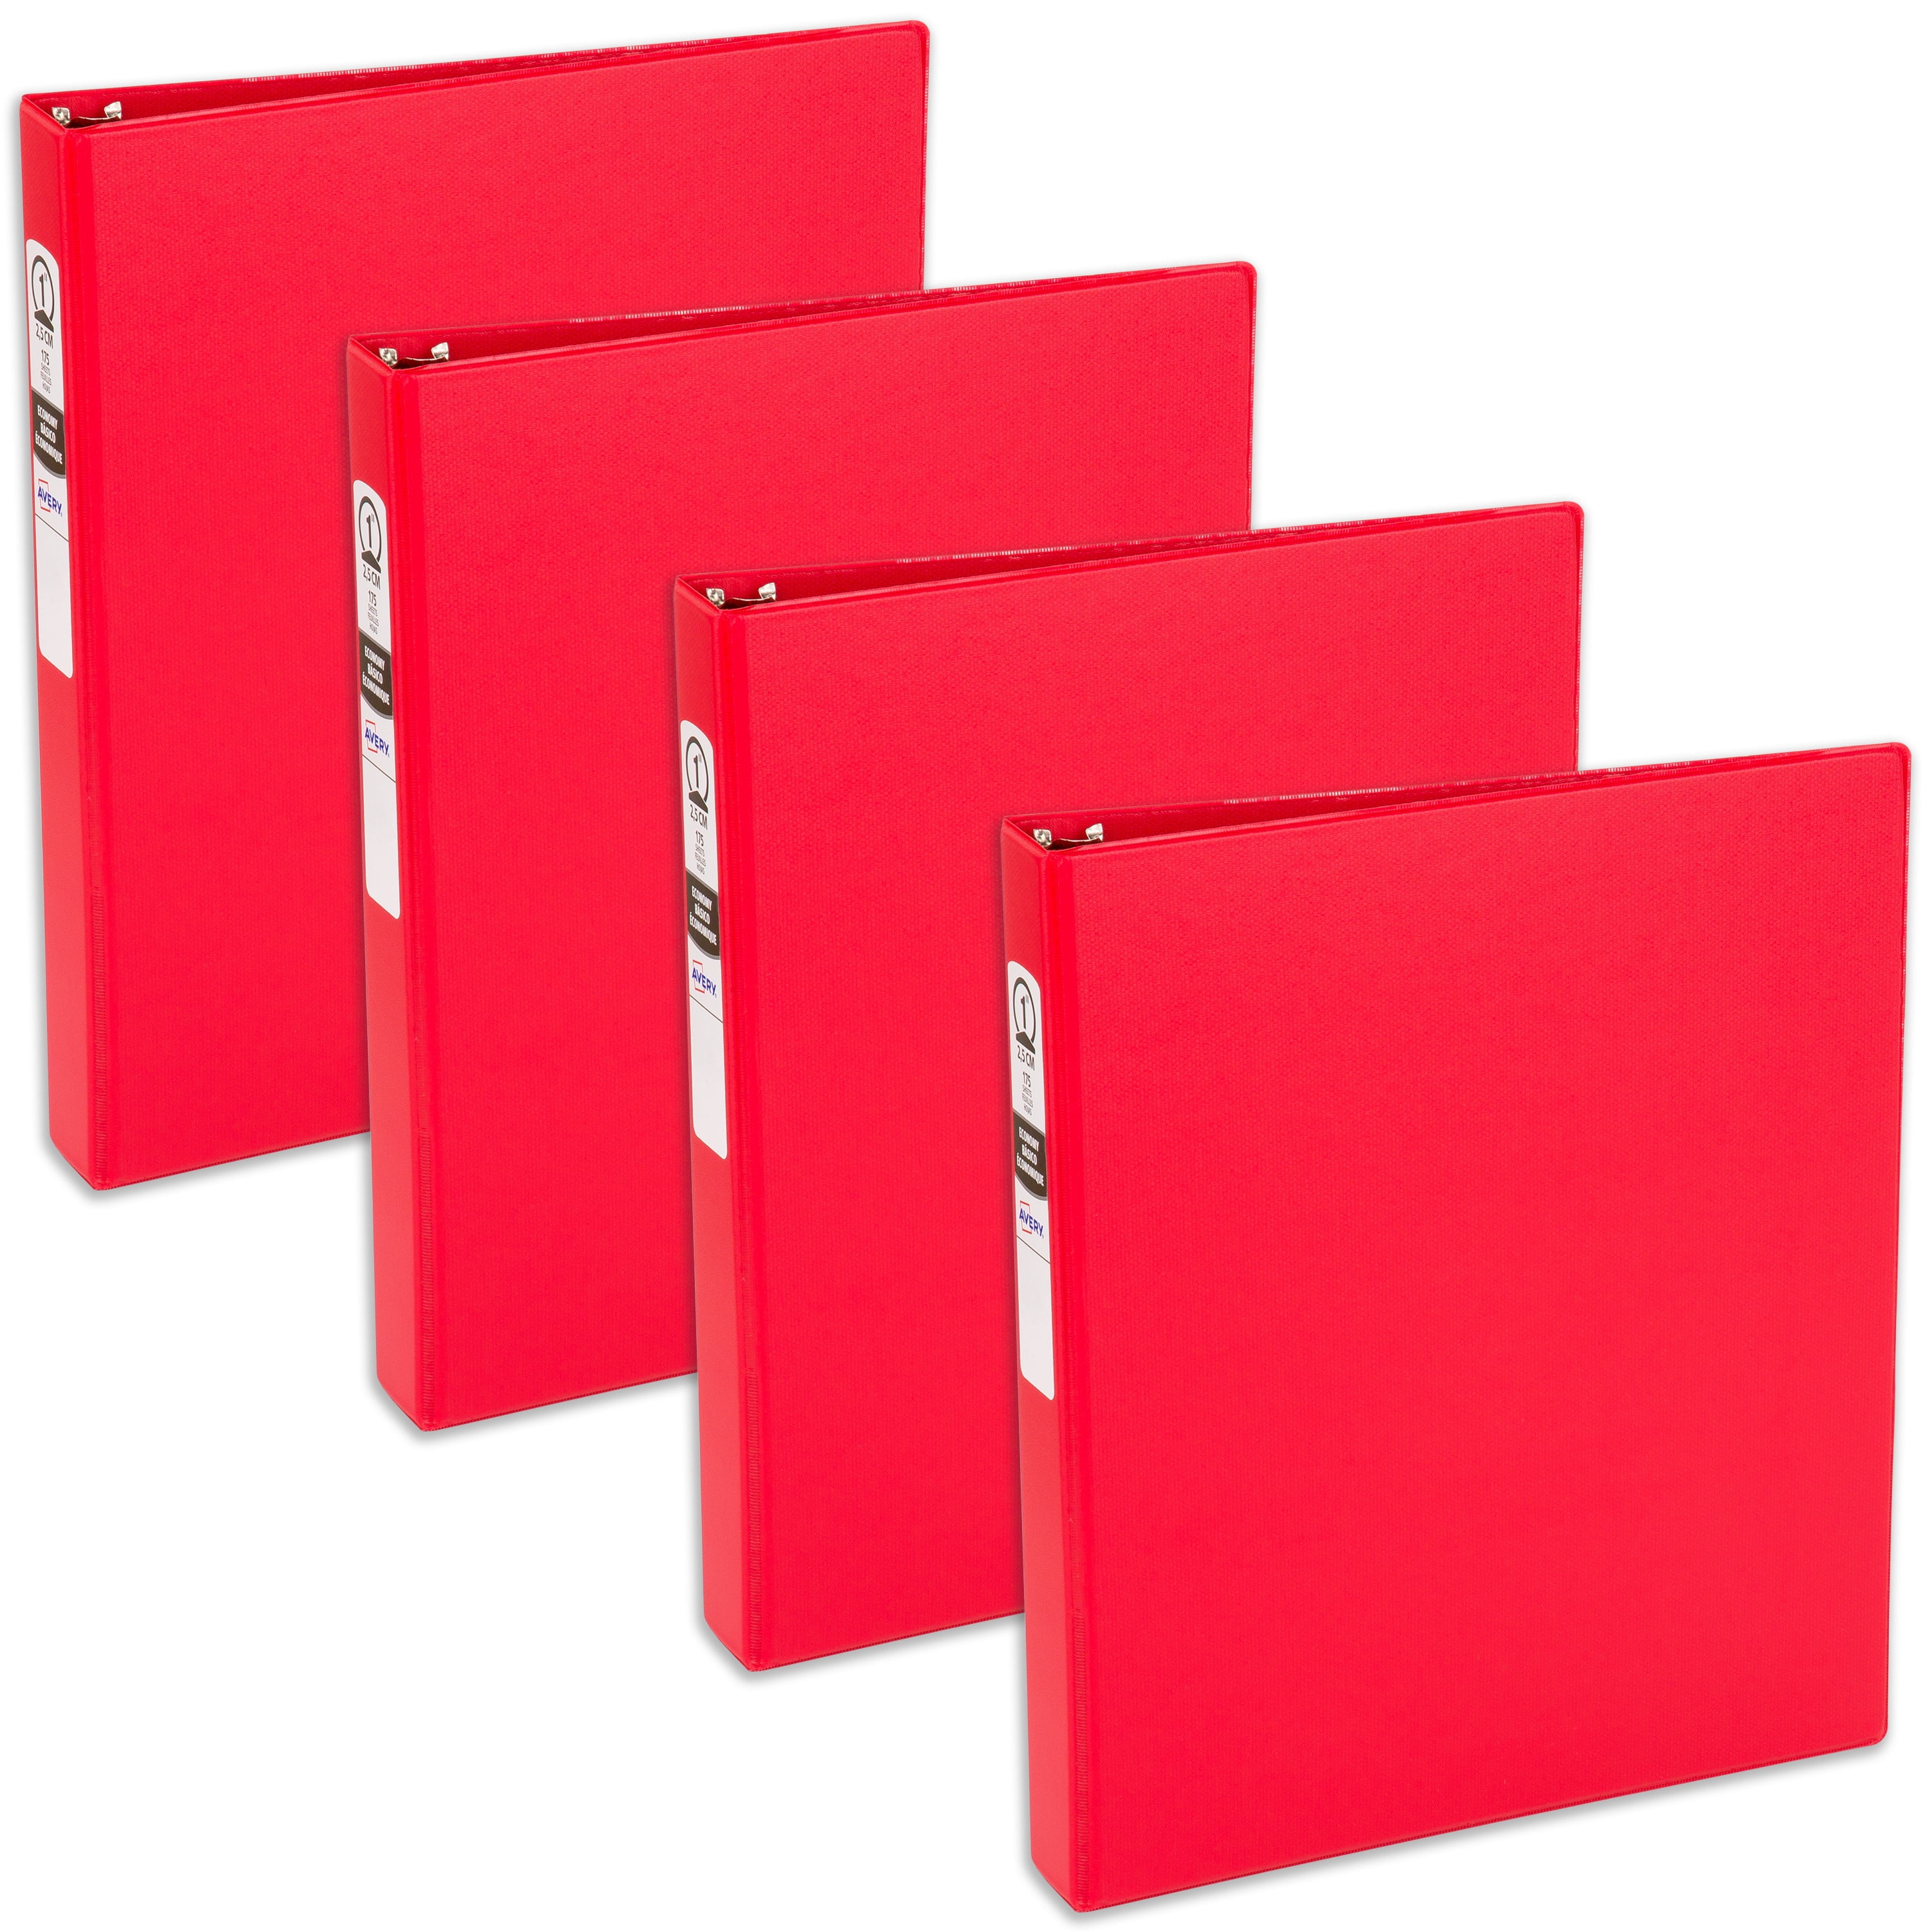 4 Inch, Three Ring Binder, White, Angle D-rings - Pack of 2 –  RingBinderDepot.com